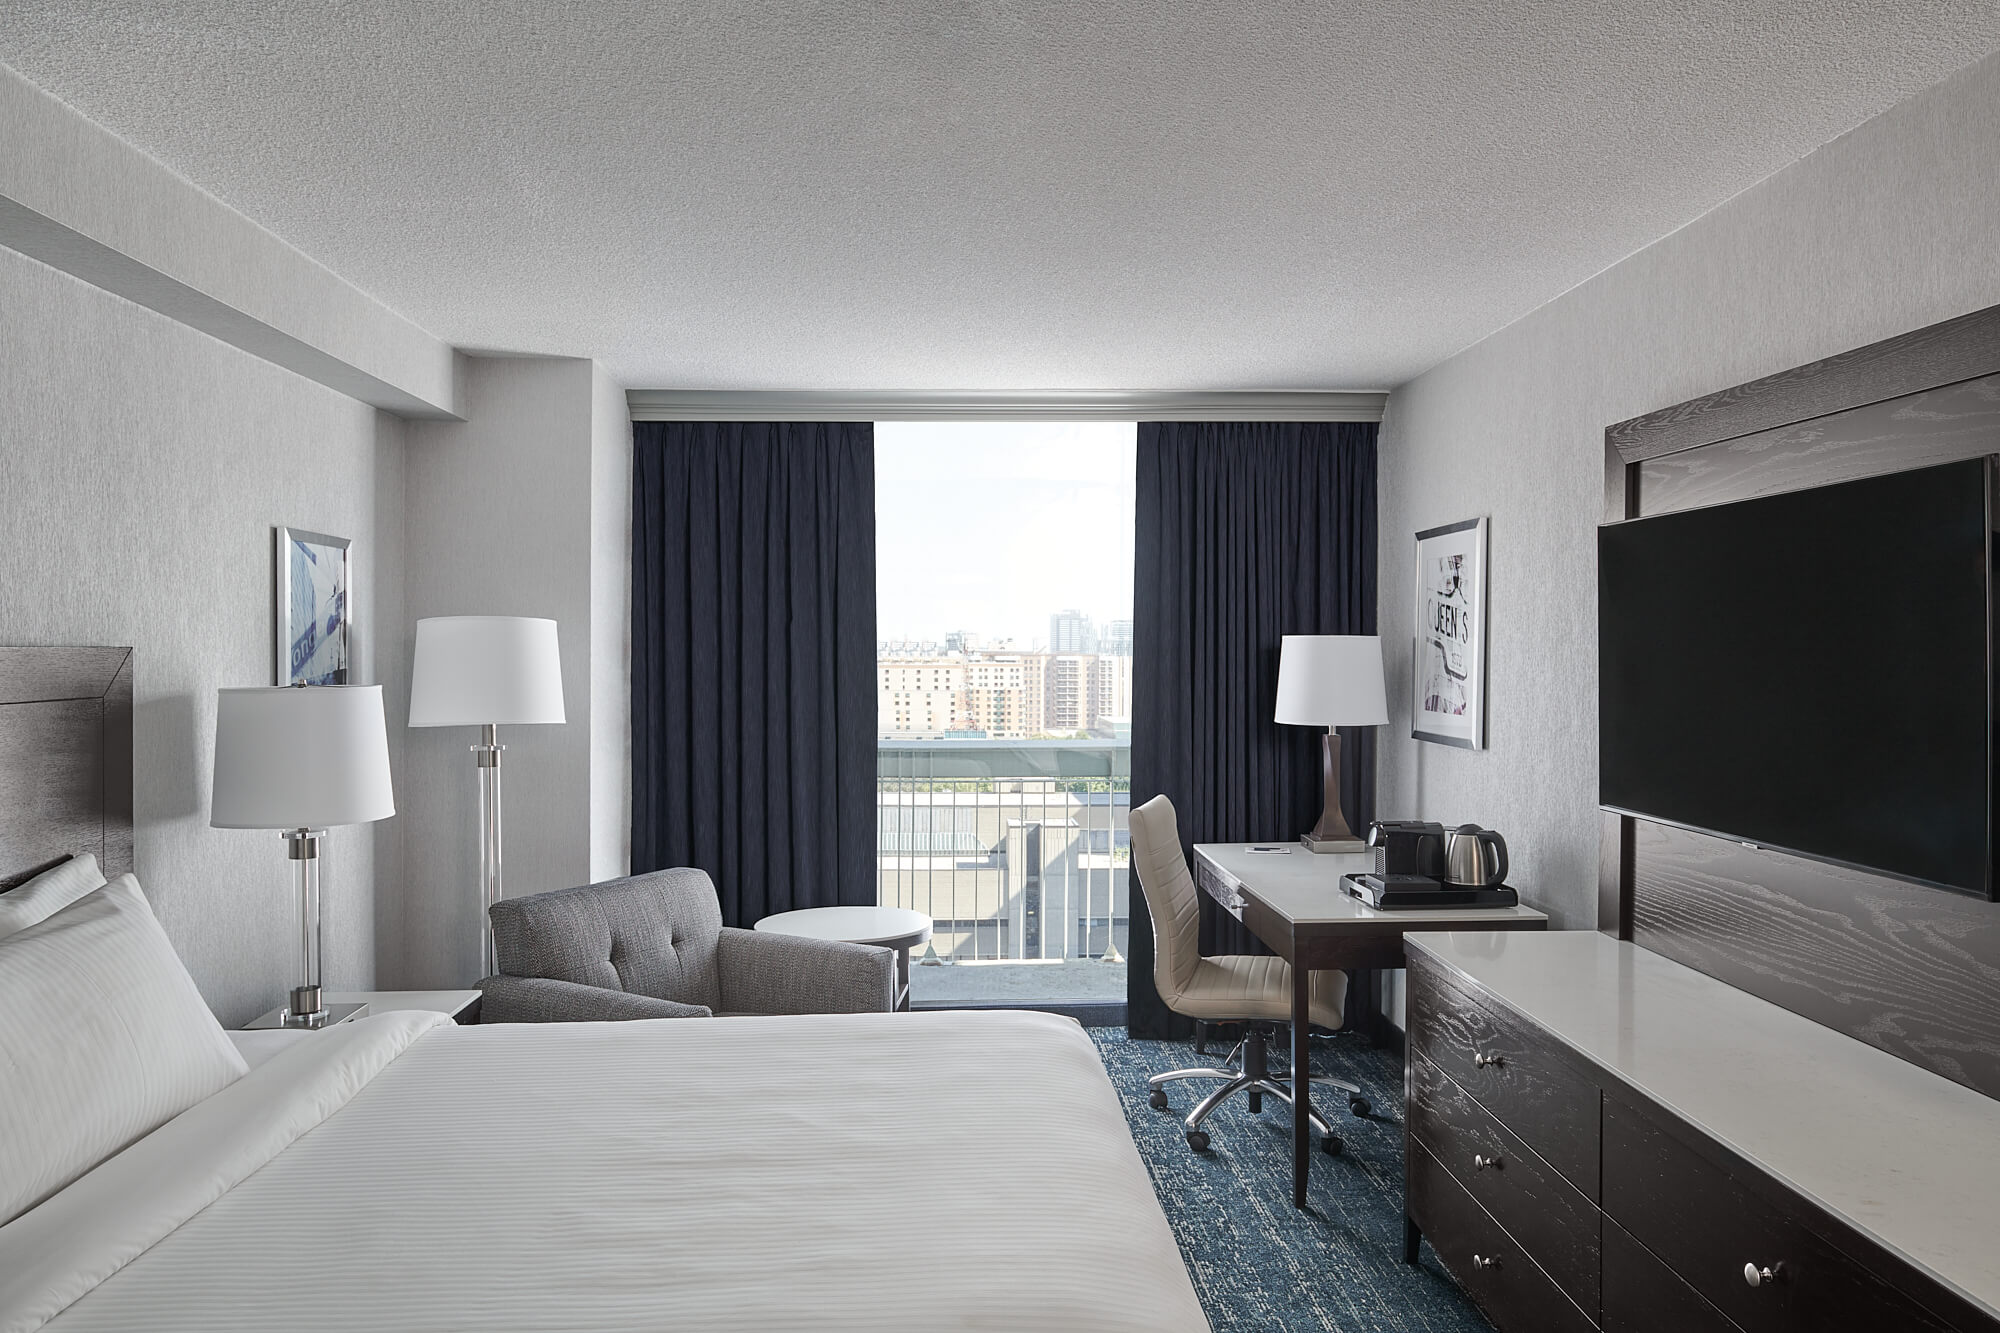 Executive Room, Hotel Rooms & Suites in Chelsea Hotel, Toronto 